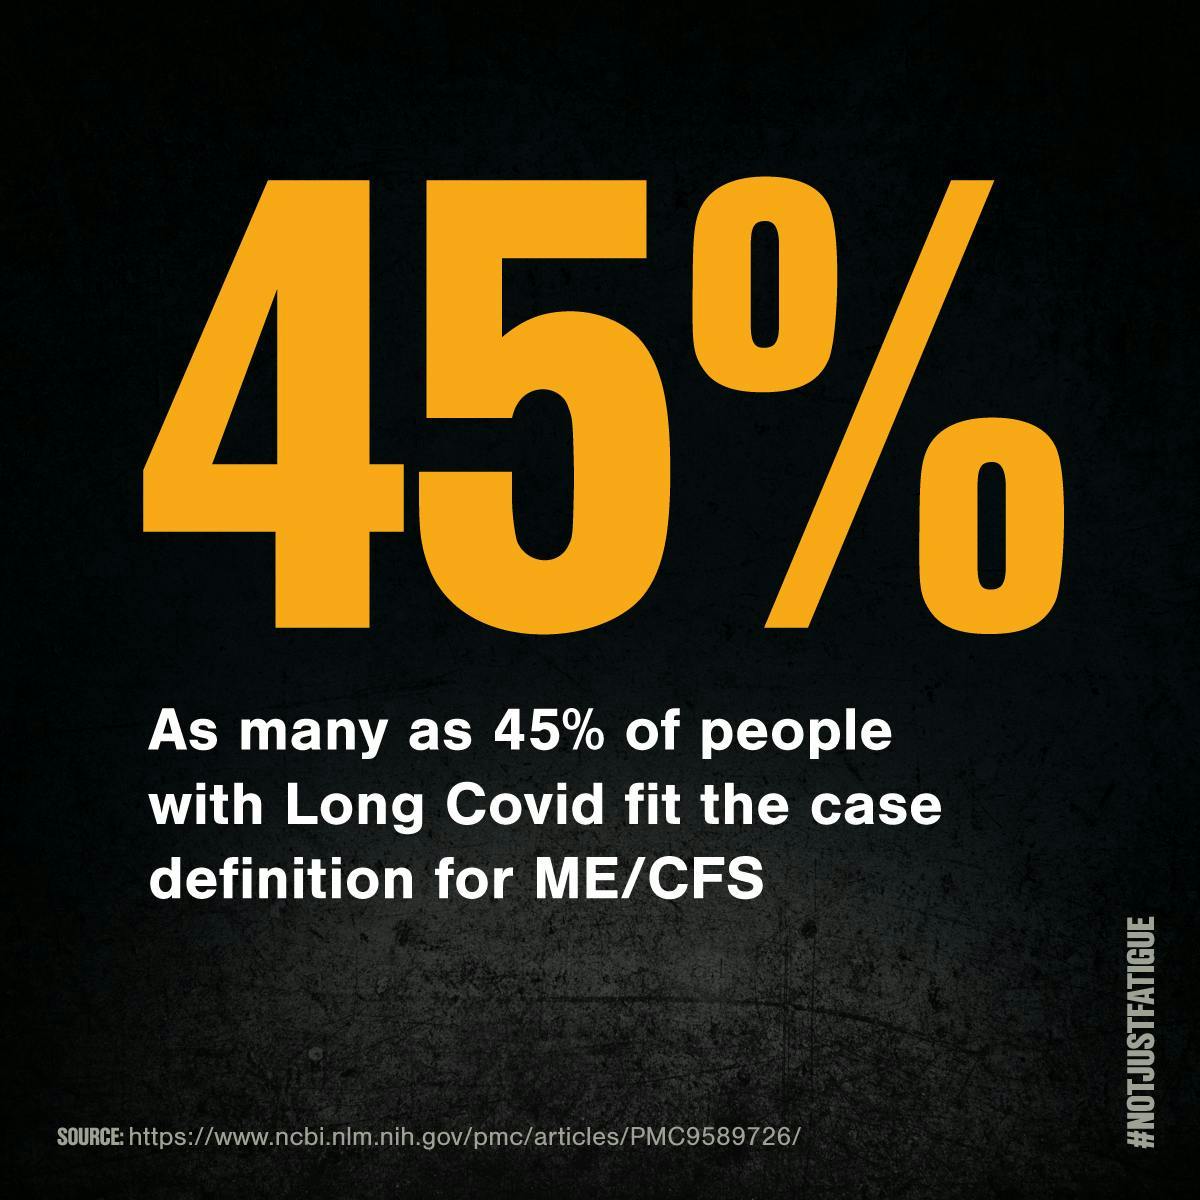 As many as 45% of people with Long Covid fit the case definition for ME/CFS